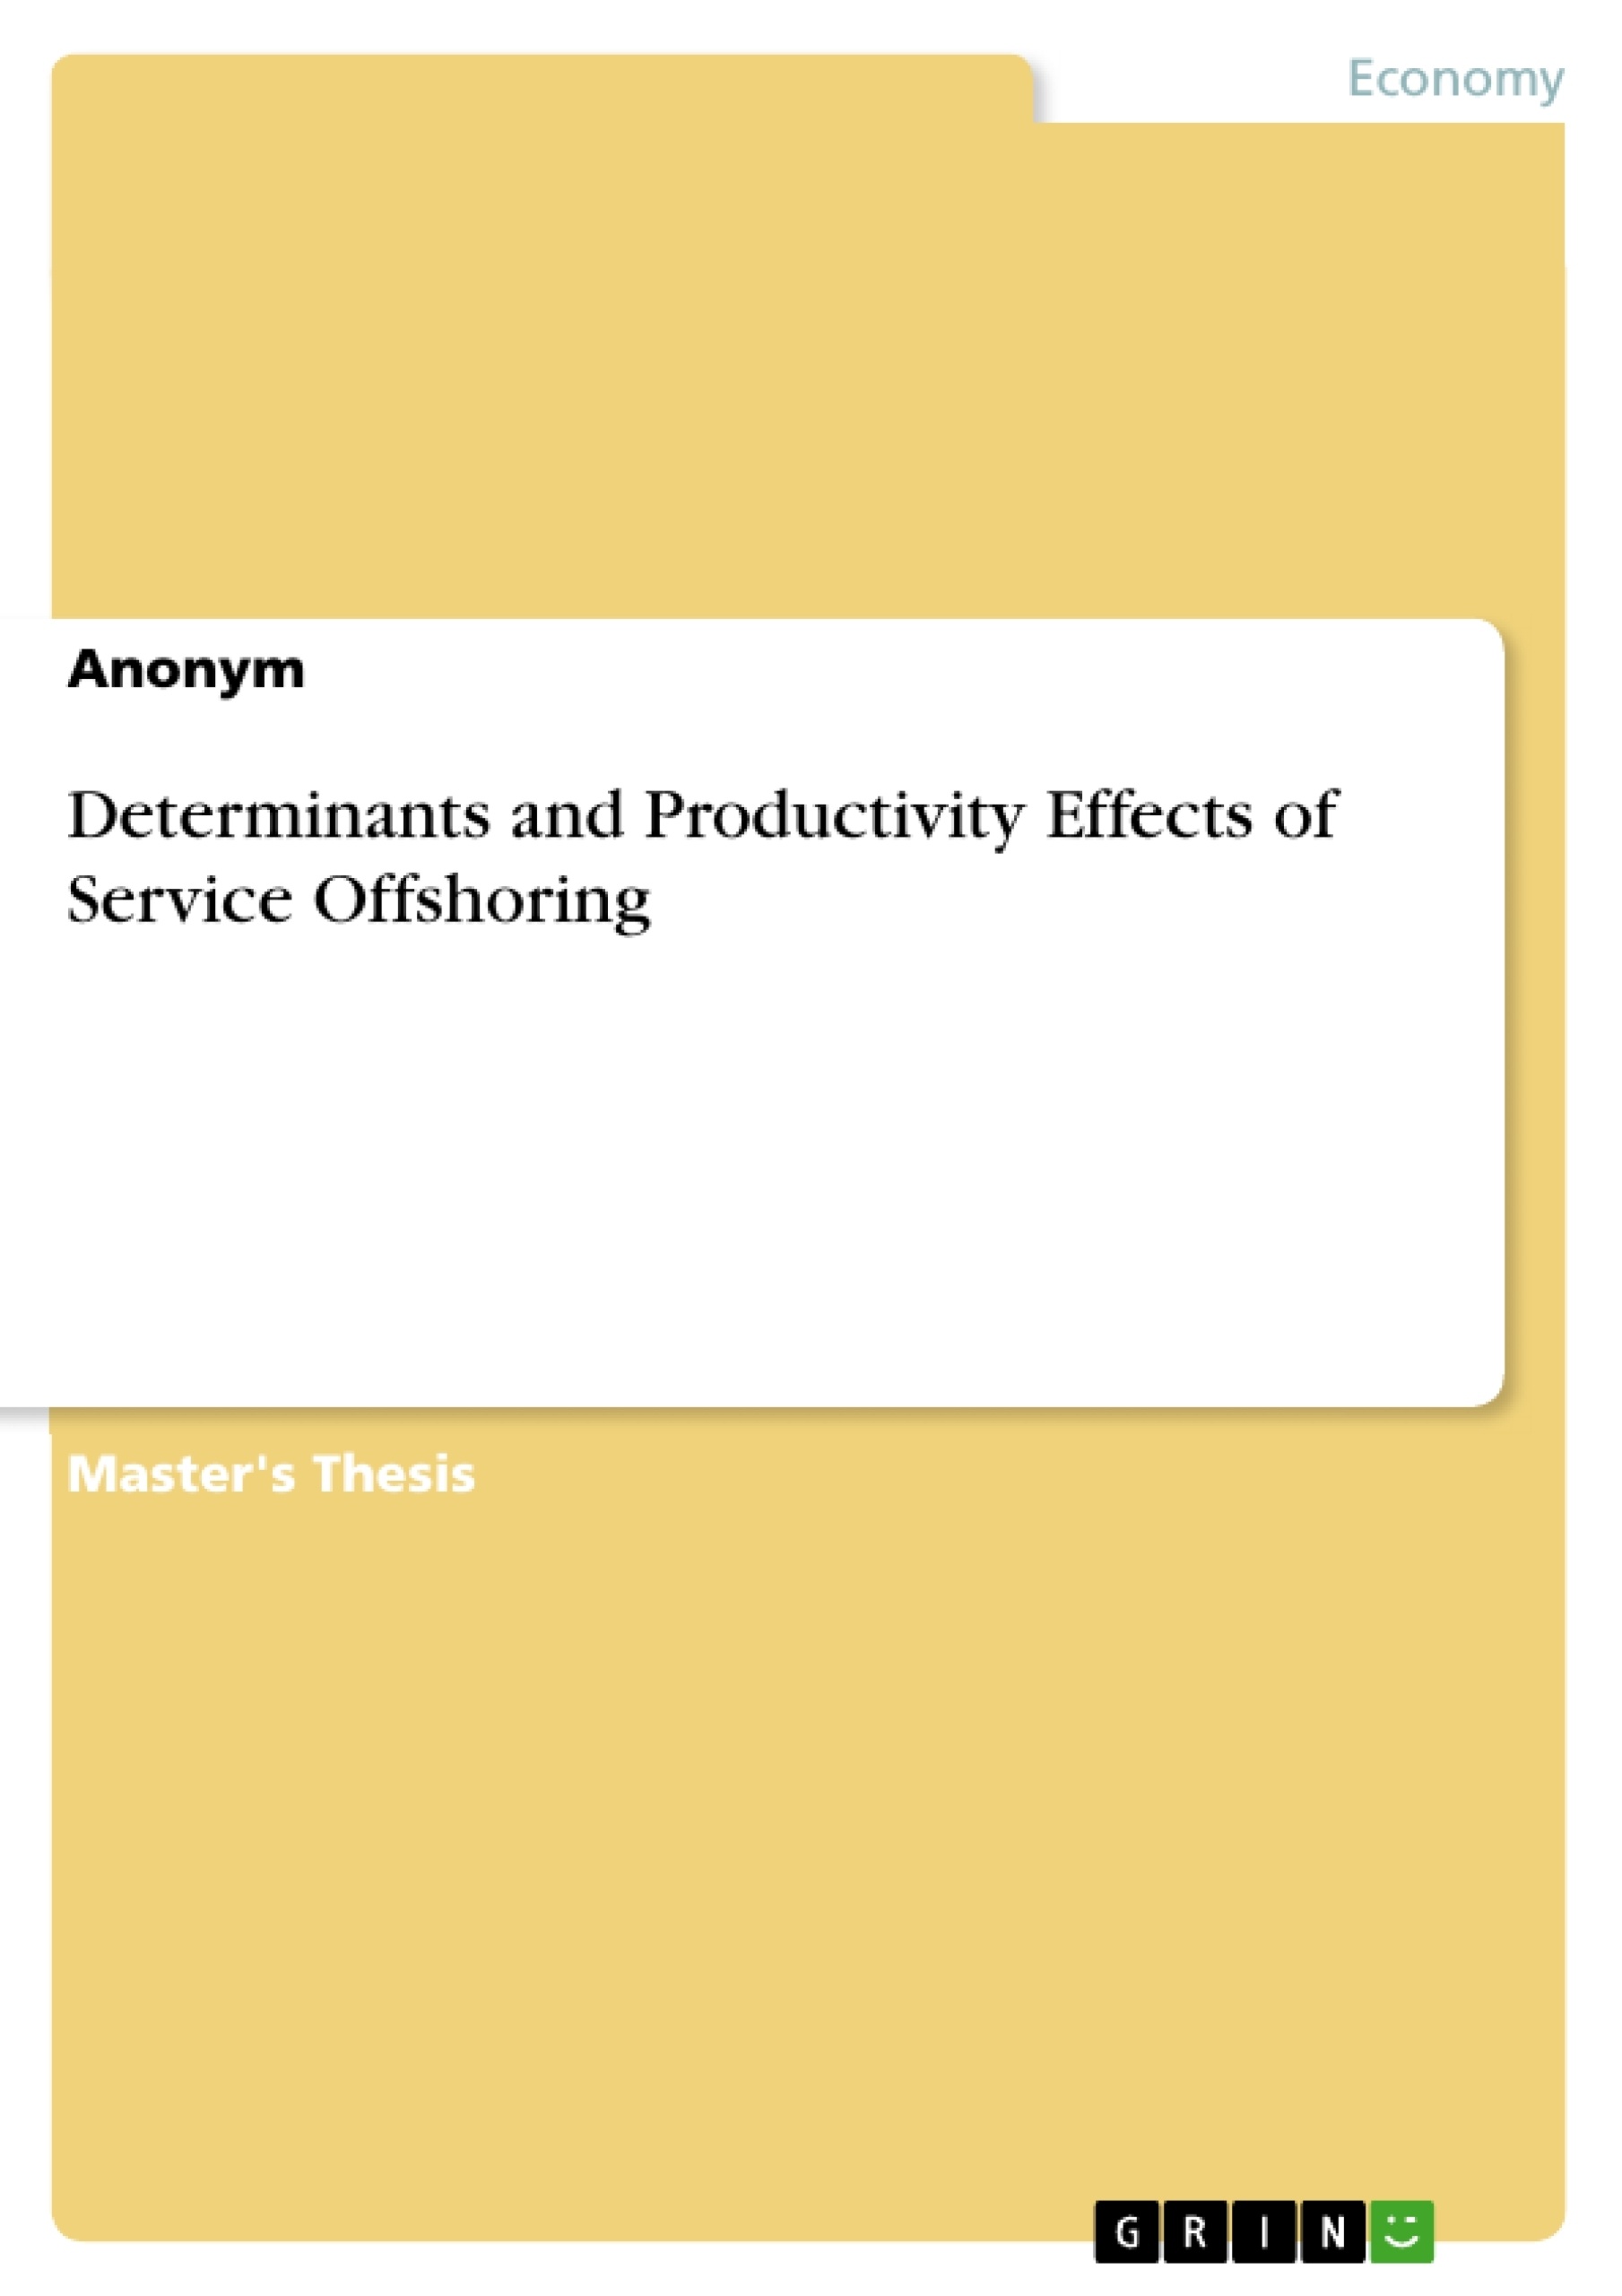 Title: Determinants and Productivity Effects of Service Offshoring